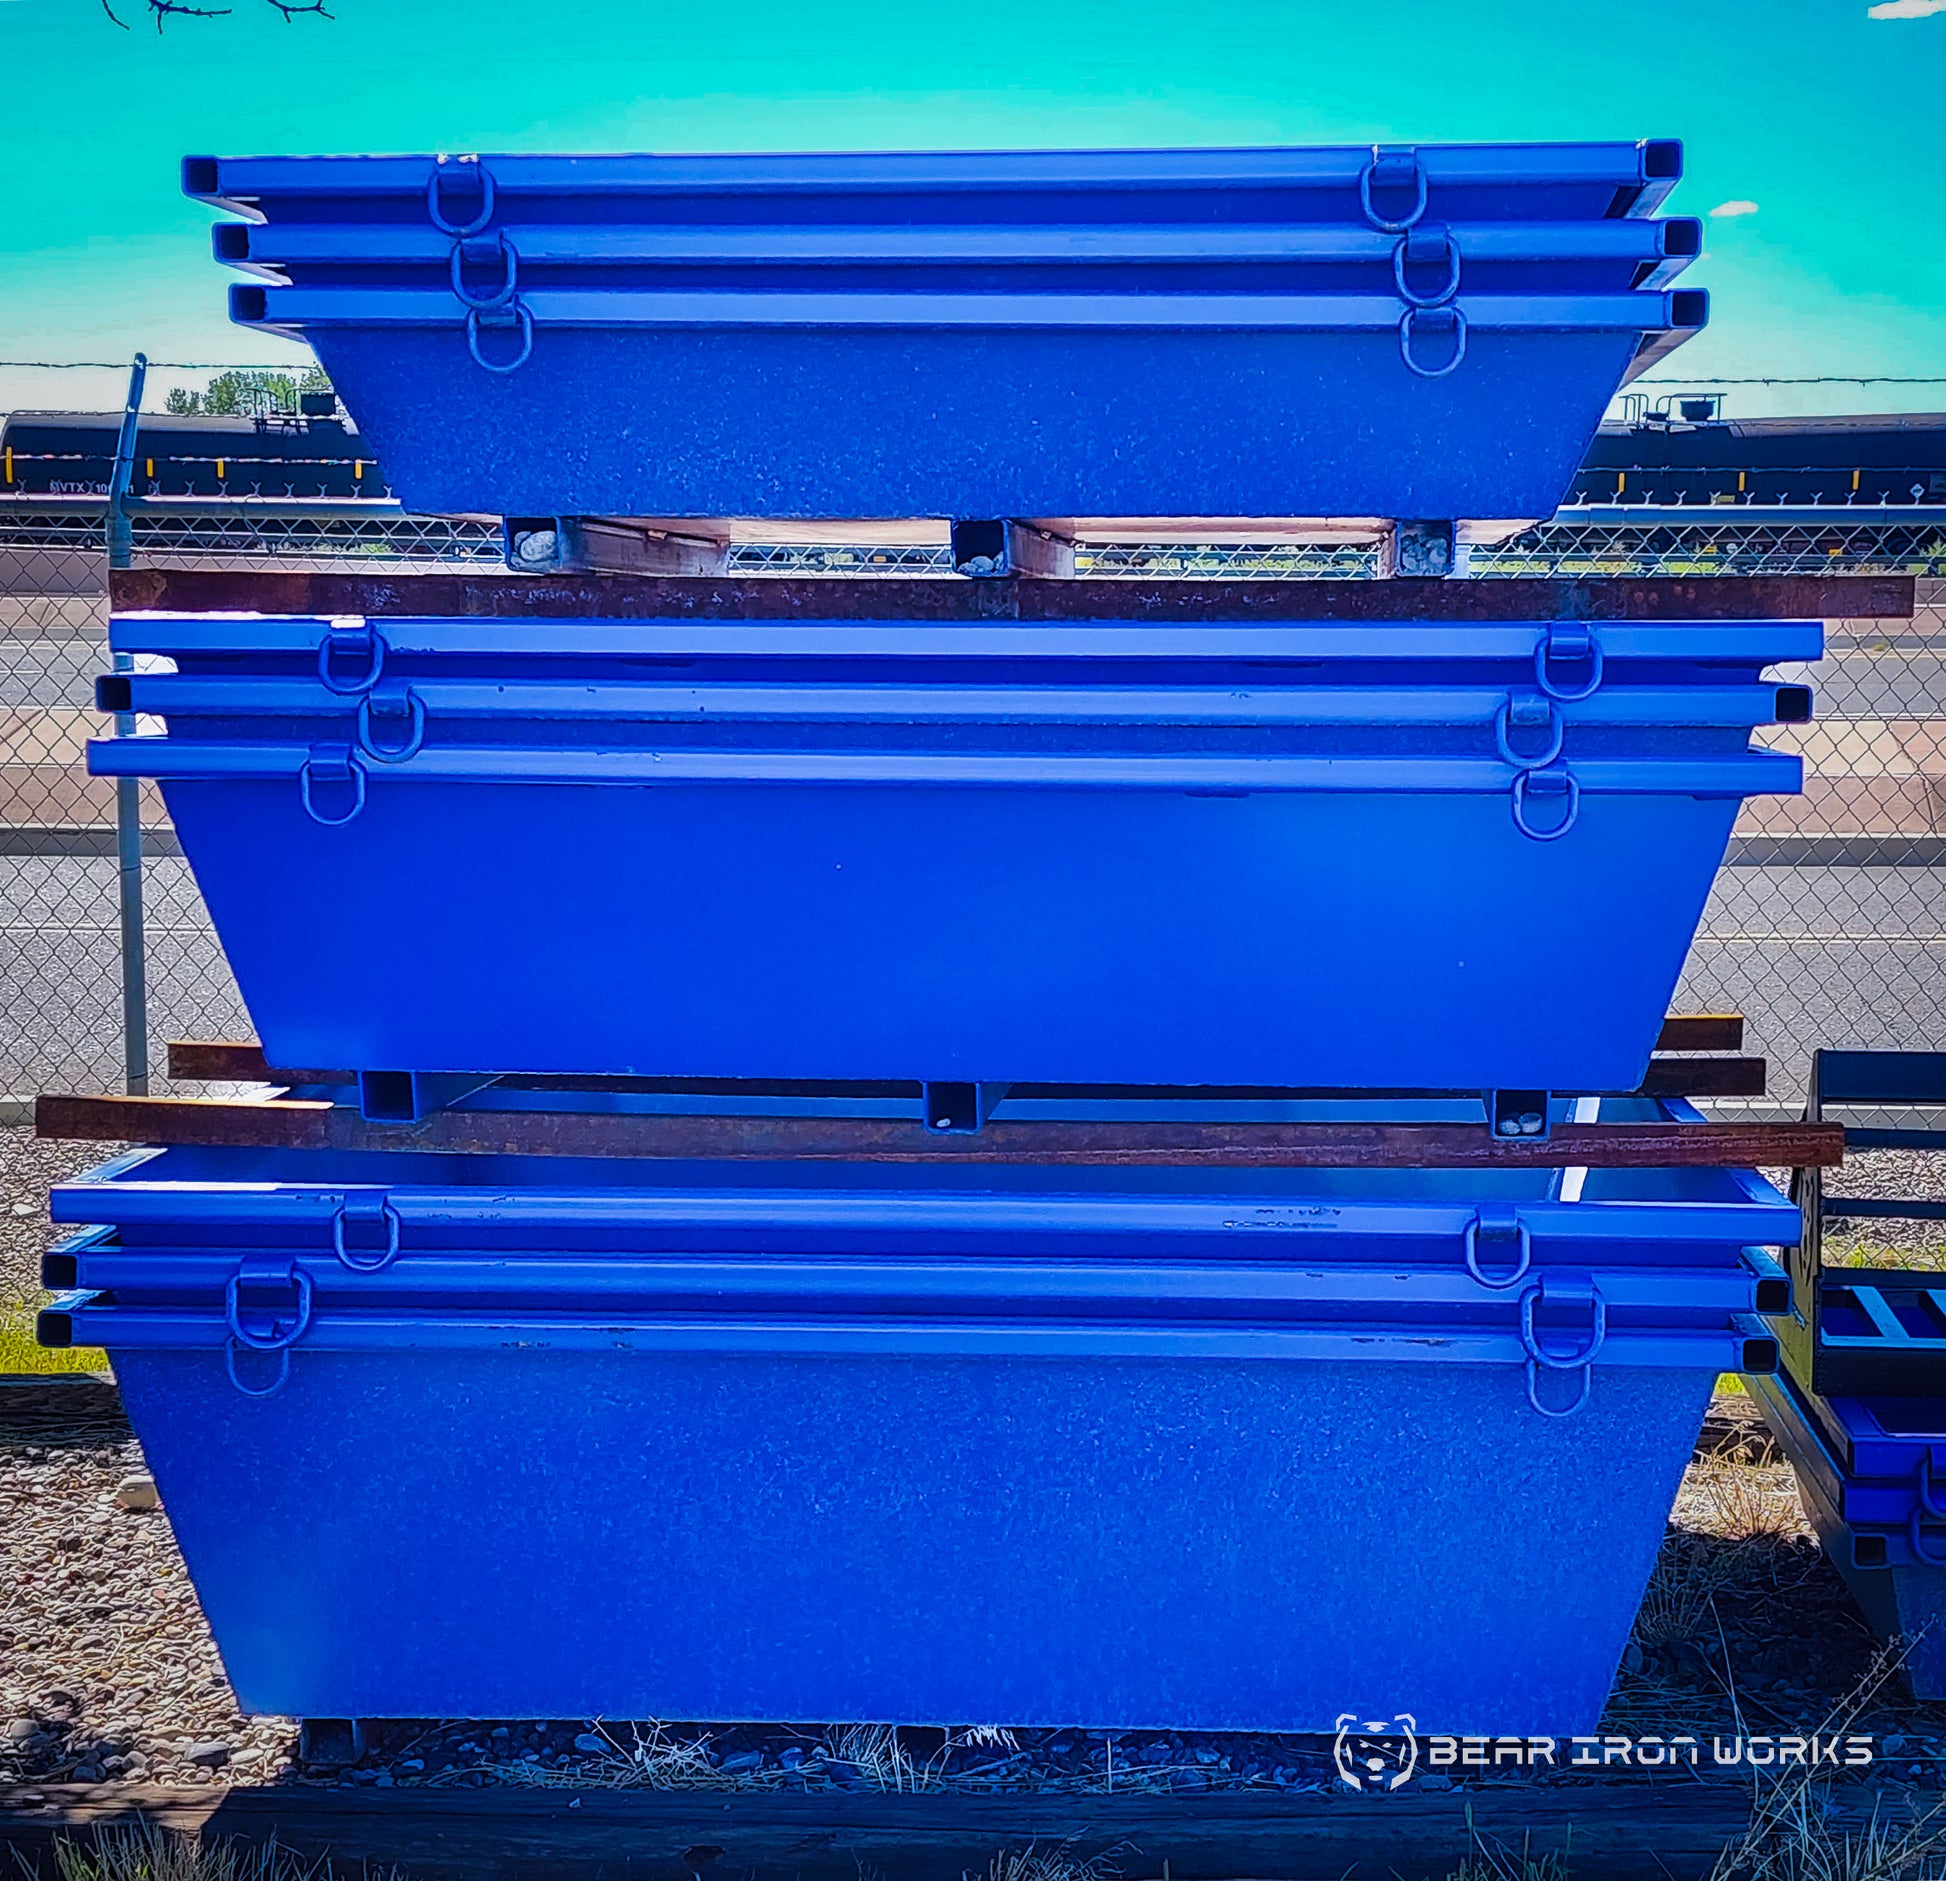 Concrete washout tubs stacked together ready for use by a concrete washout service.